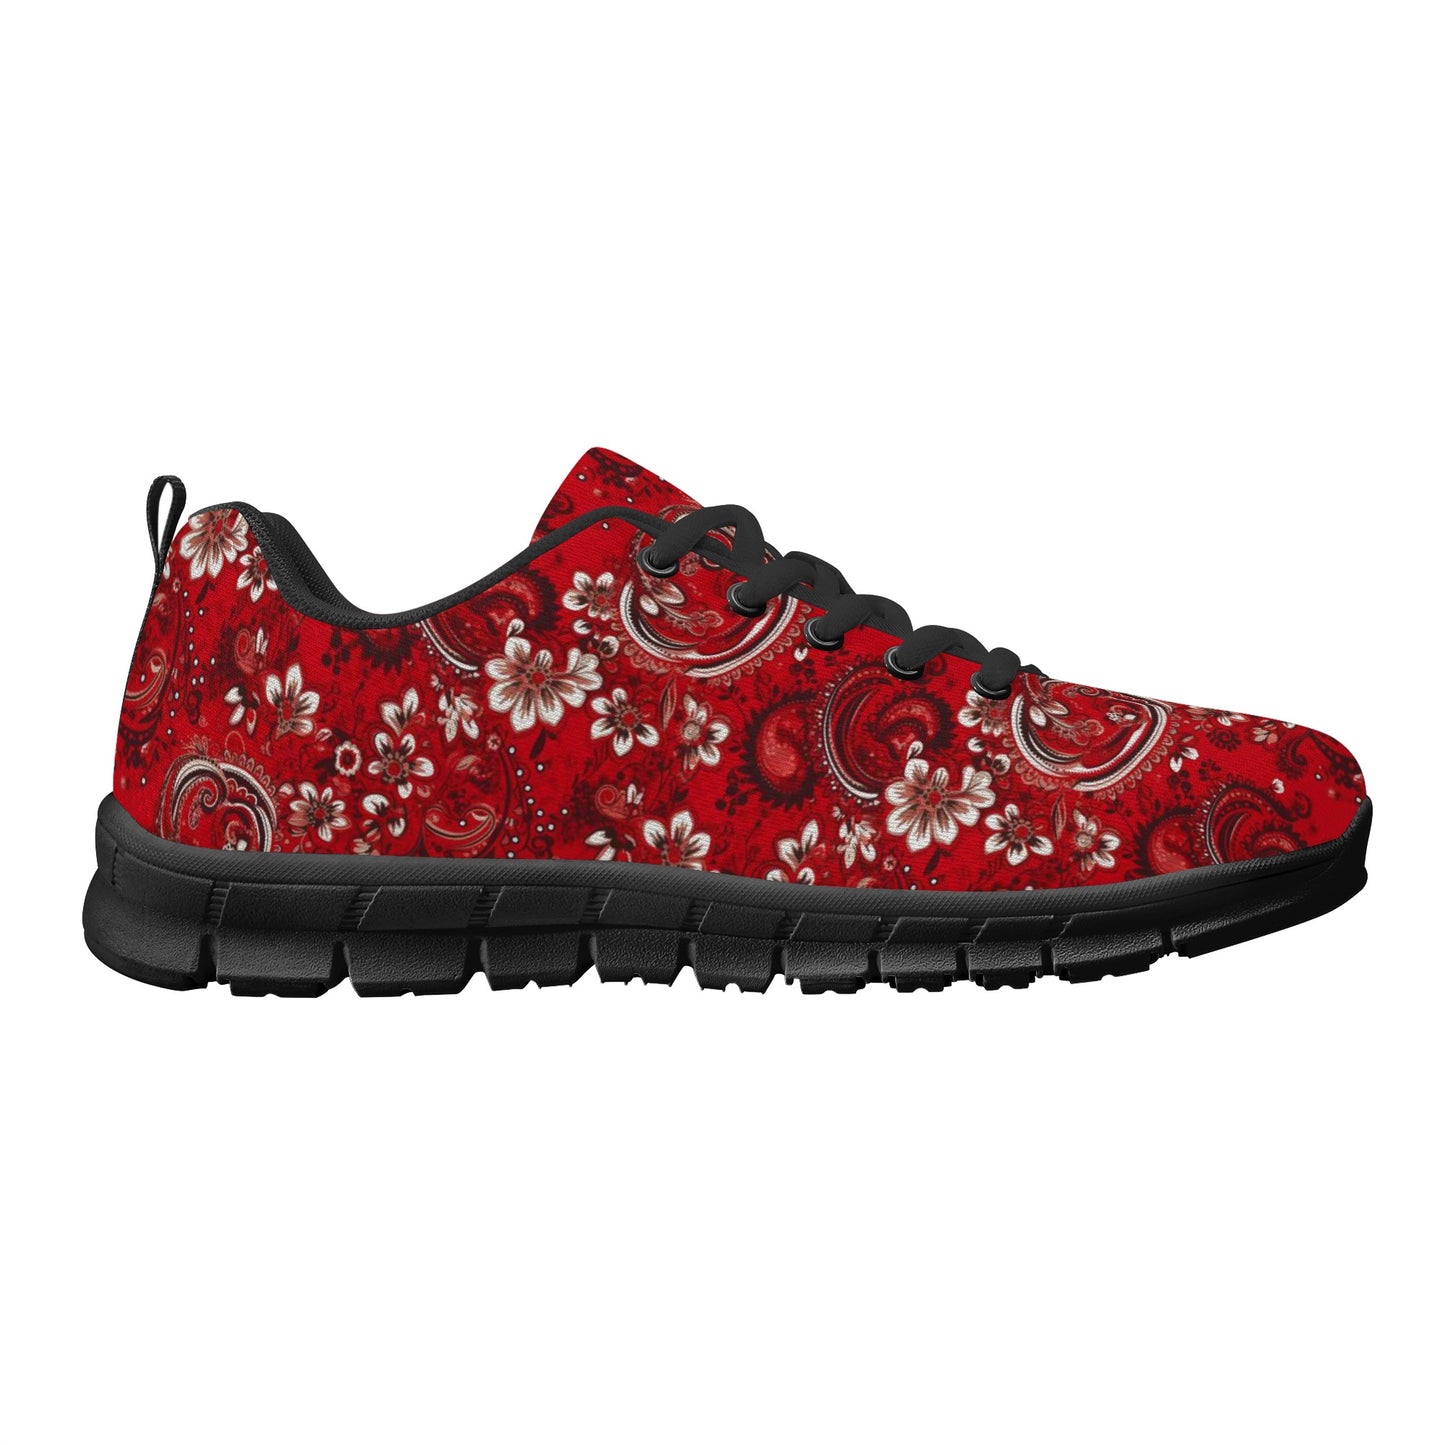 Red Bandana Women Athletic Sneaker, Paisley Lace Up Shoe Canvas Print Designer Running Black White Mesh Breathable Ladies Shoes